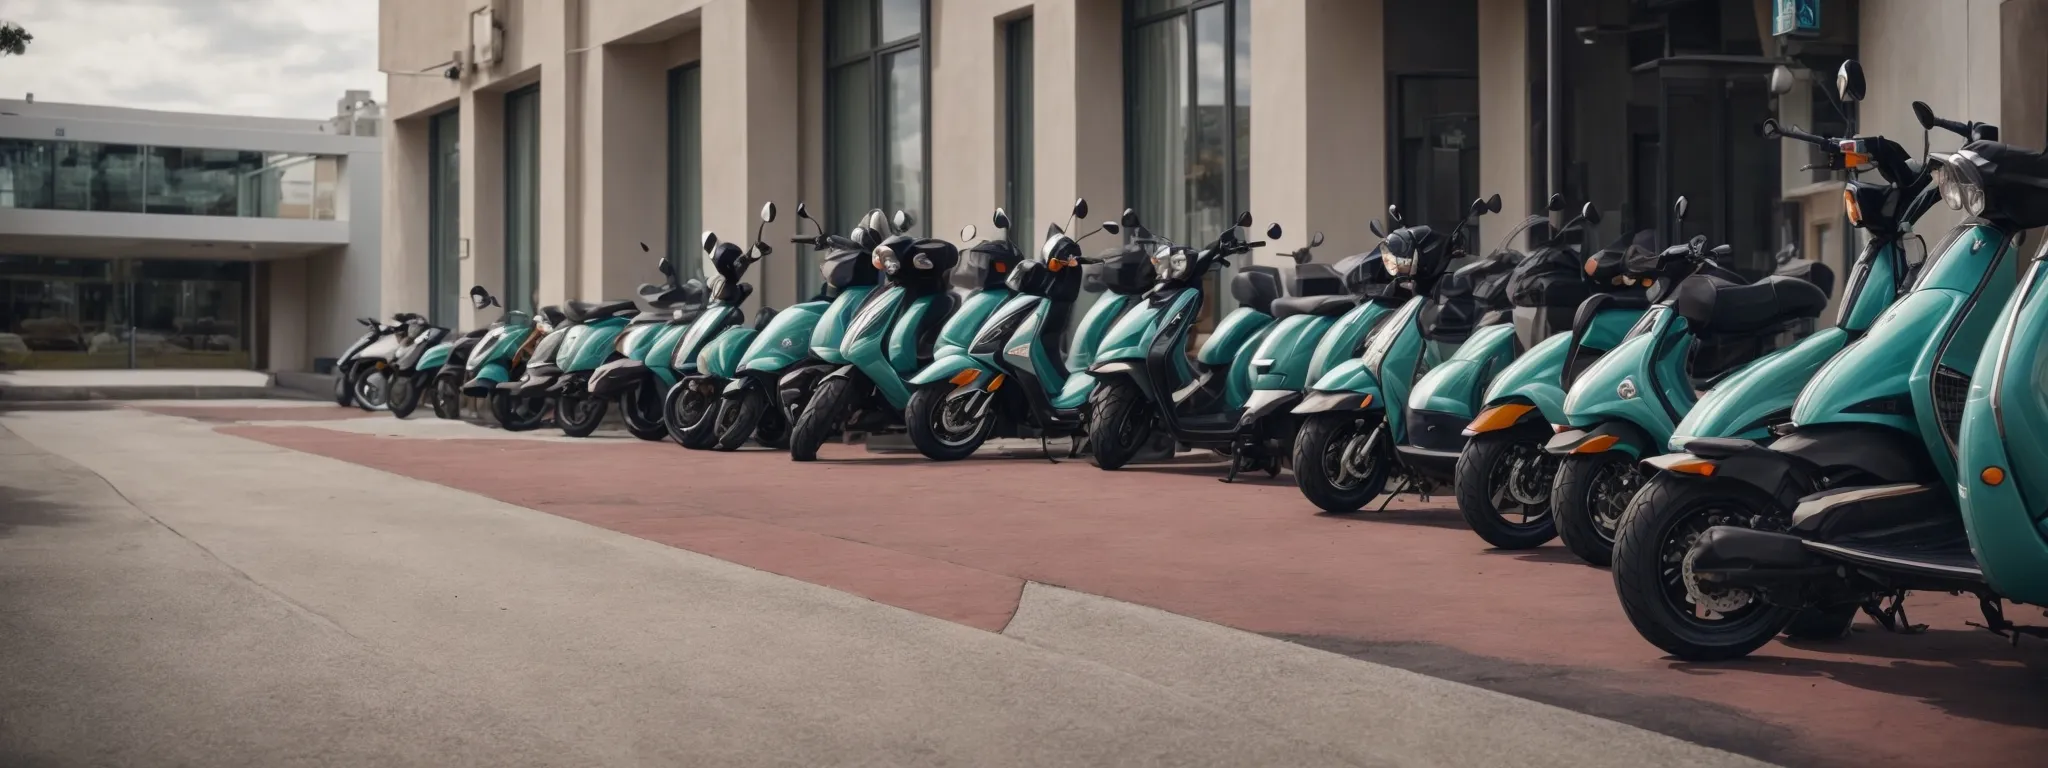 a fleet of electric scooters parked outside a modern hotel, ready for guests to use.